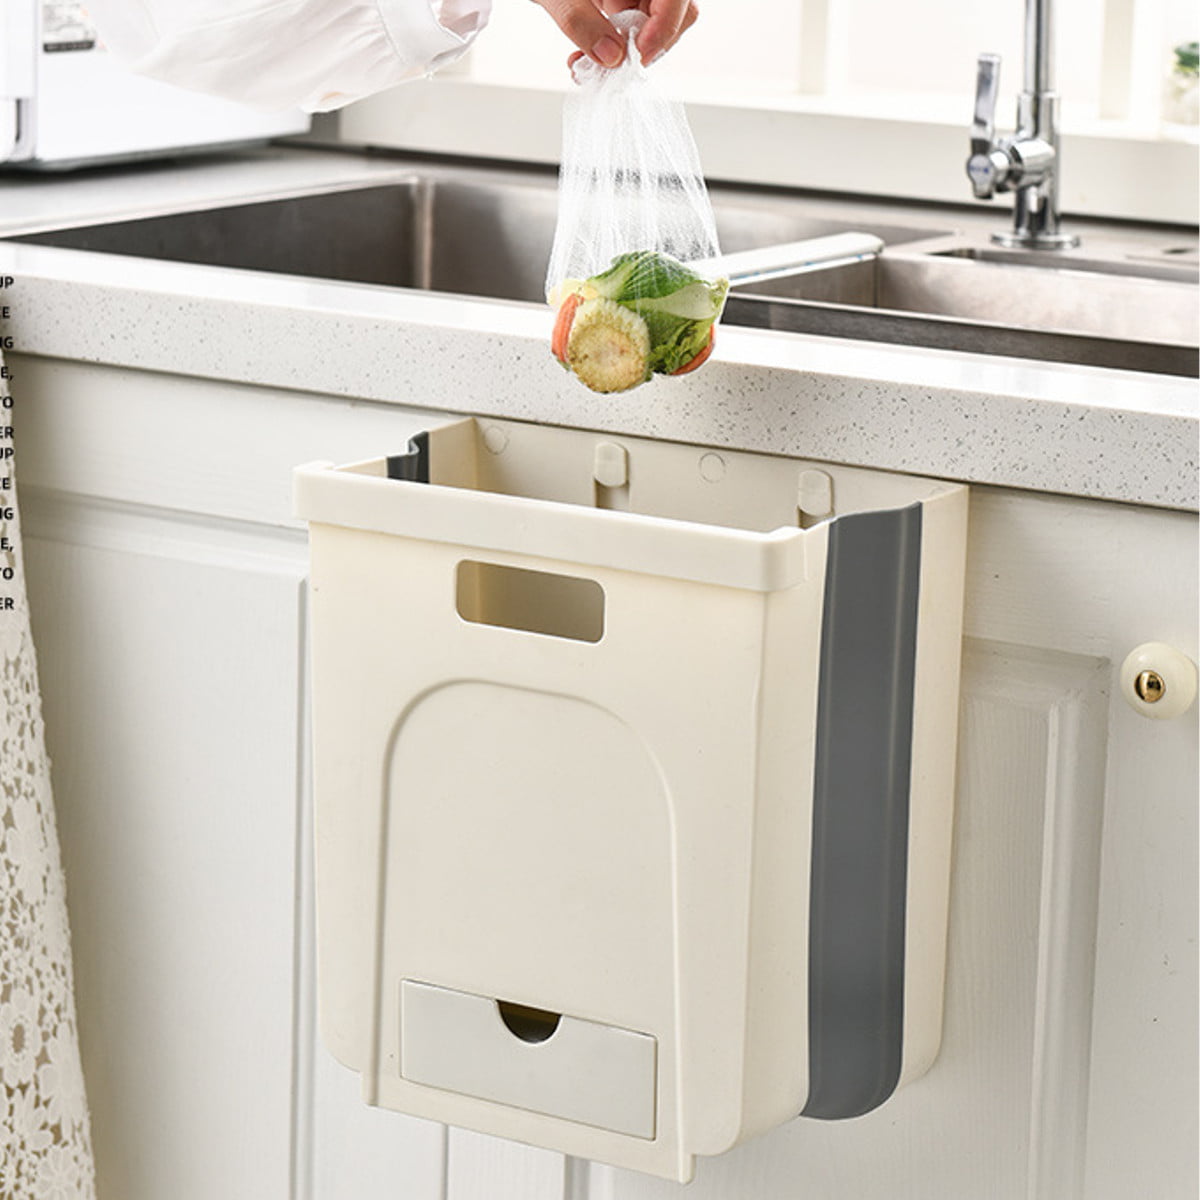 Kitchen Compost Bin for Wall Hanging or Under Sink, Small Trash Can for